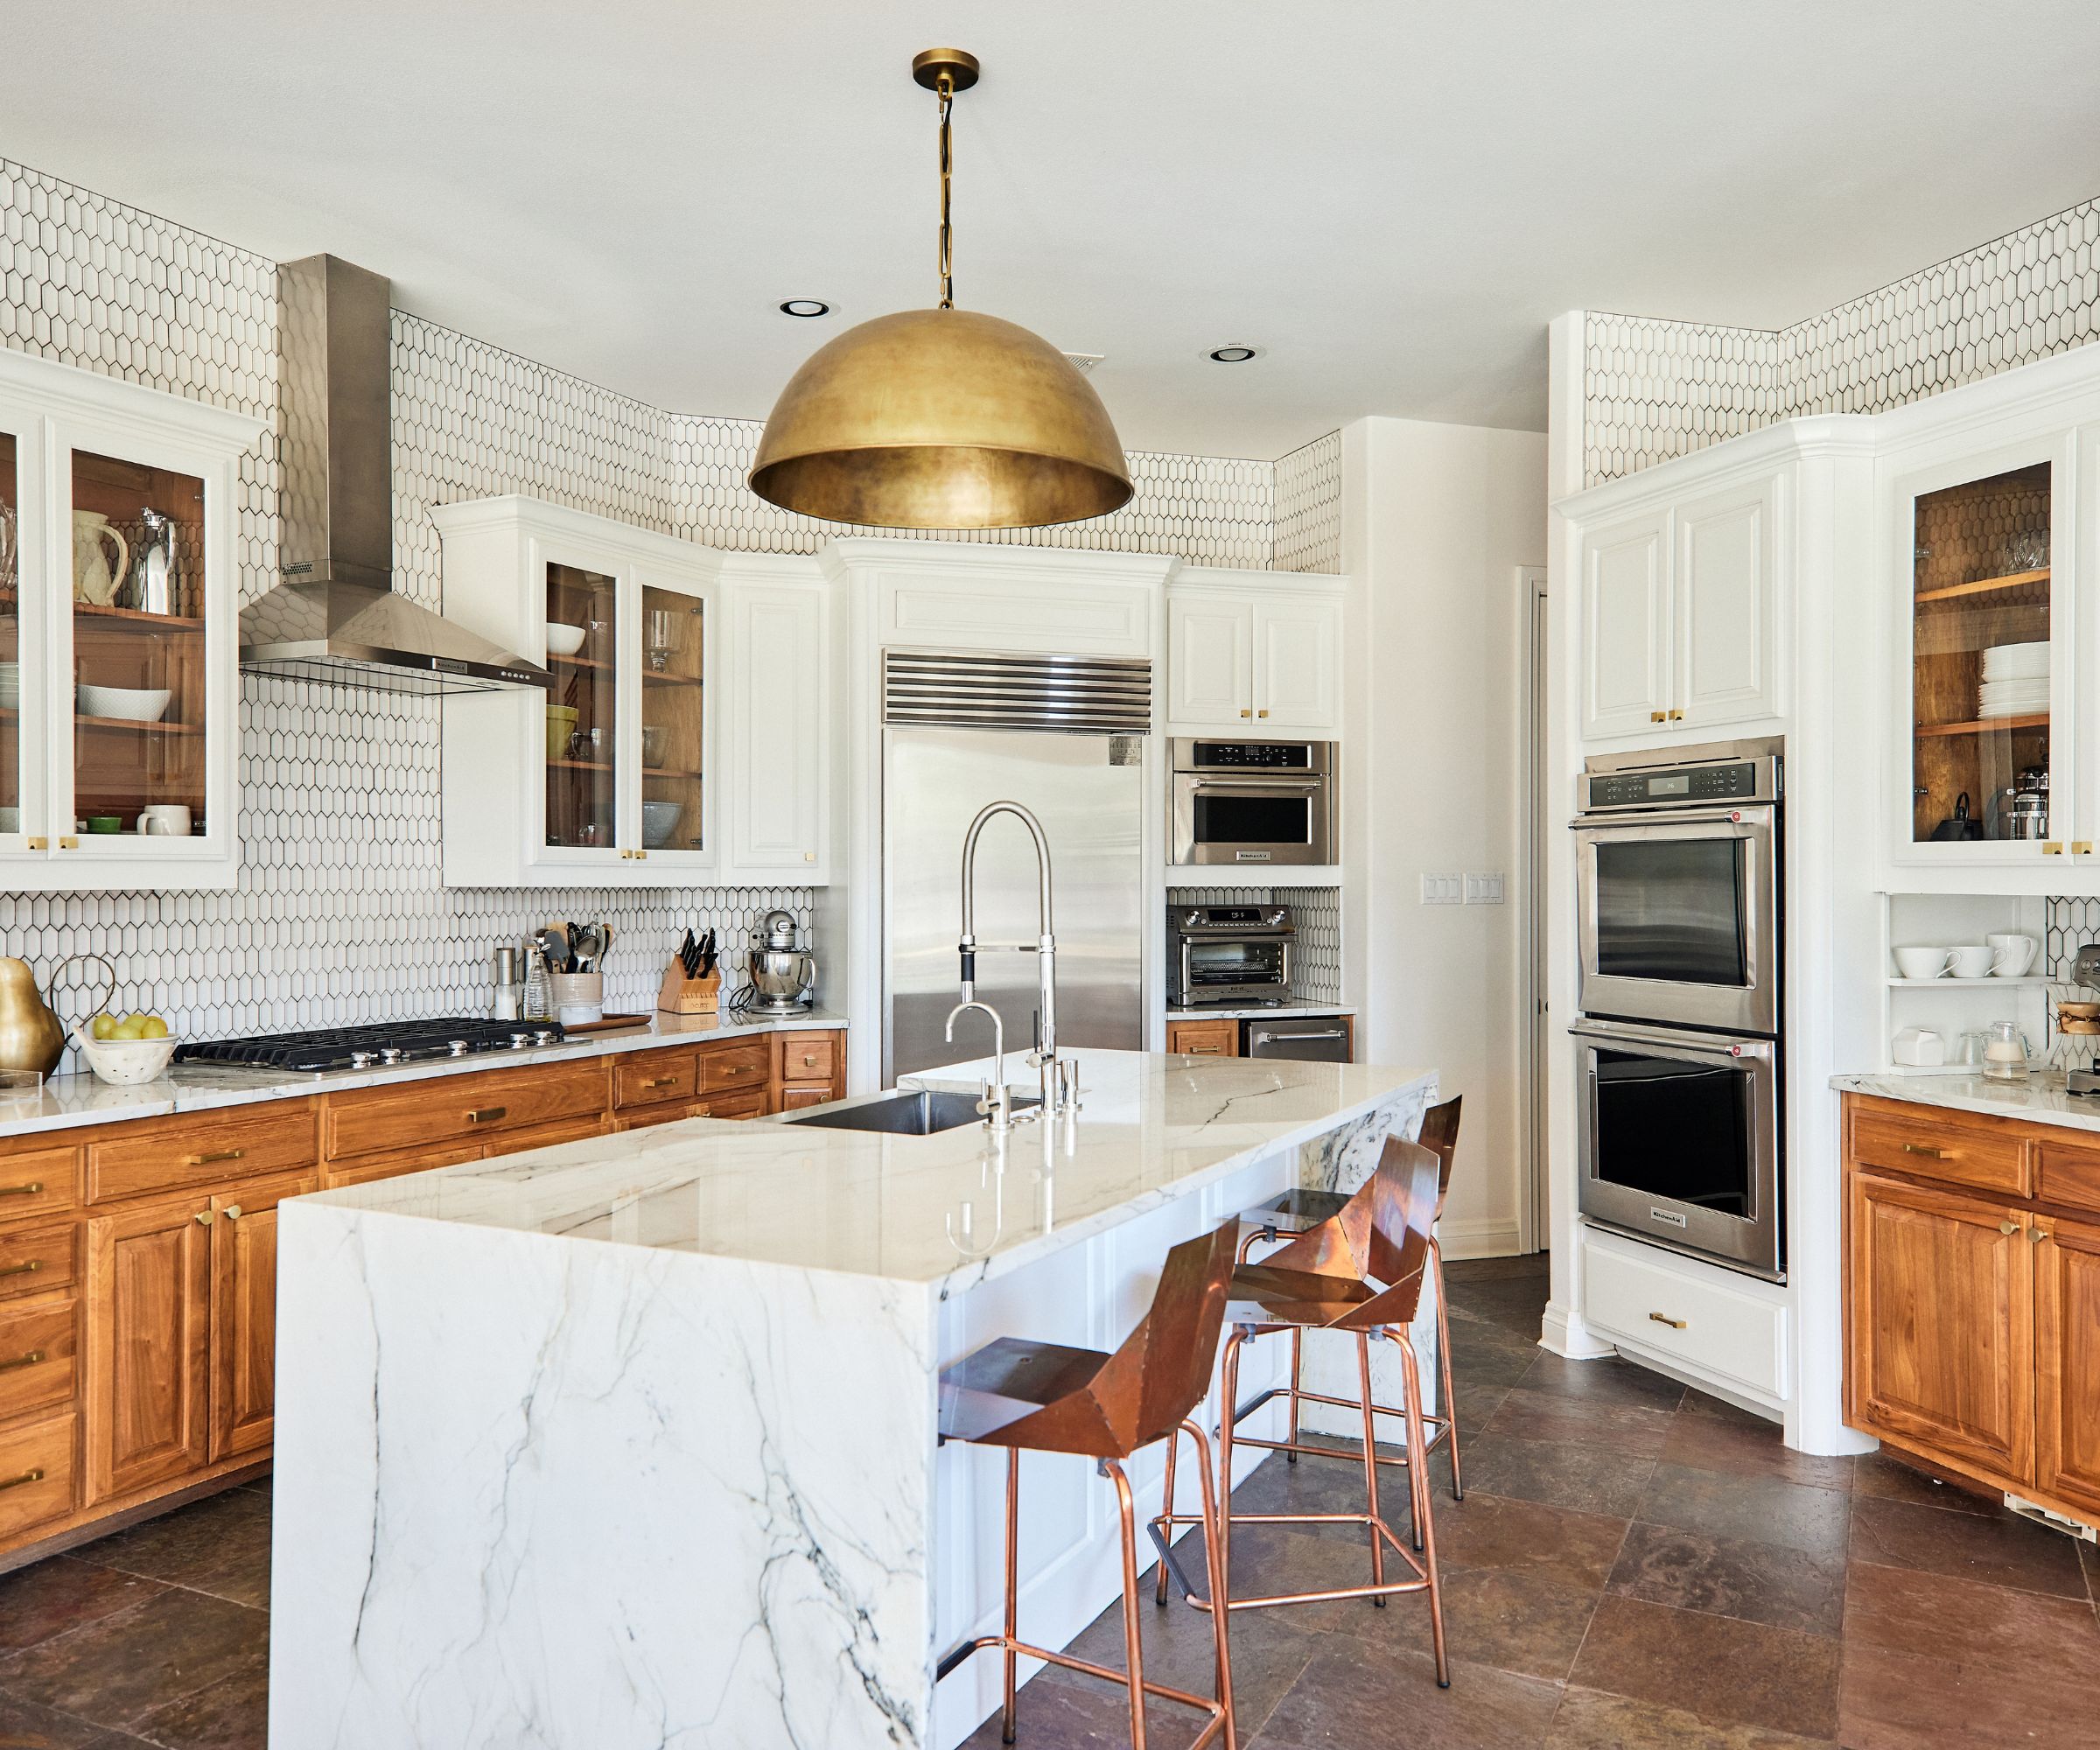 kitchen with white walls and mix of wooden and white cabinets and island with counter stools large pendant above